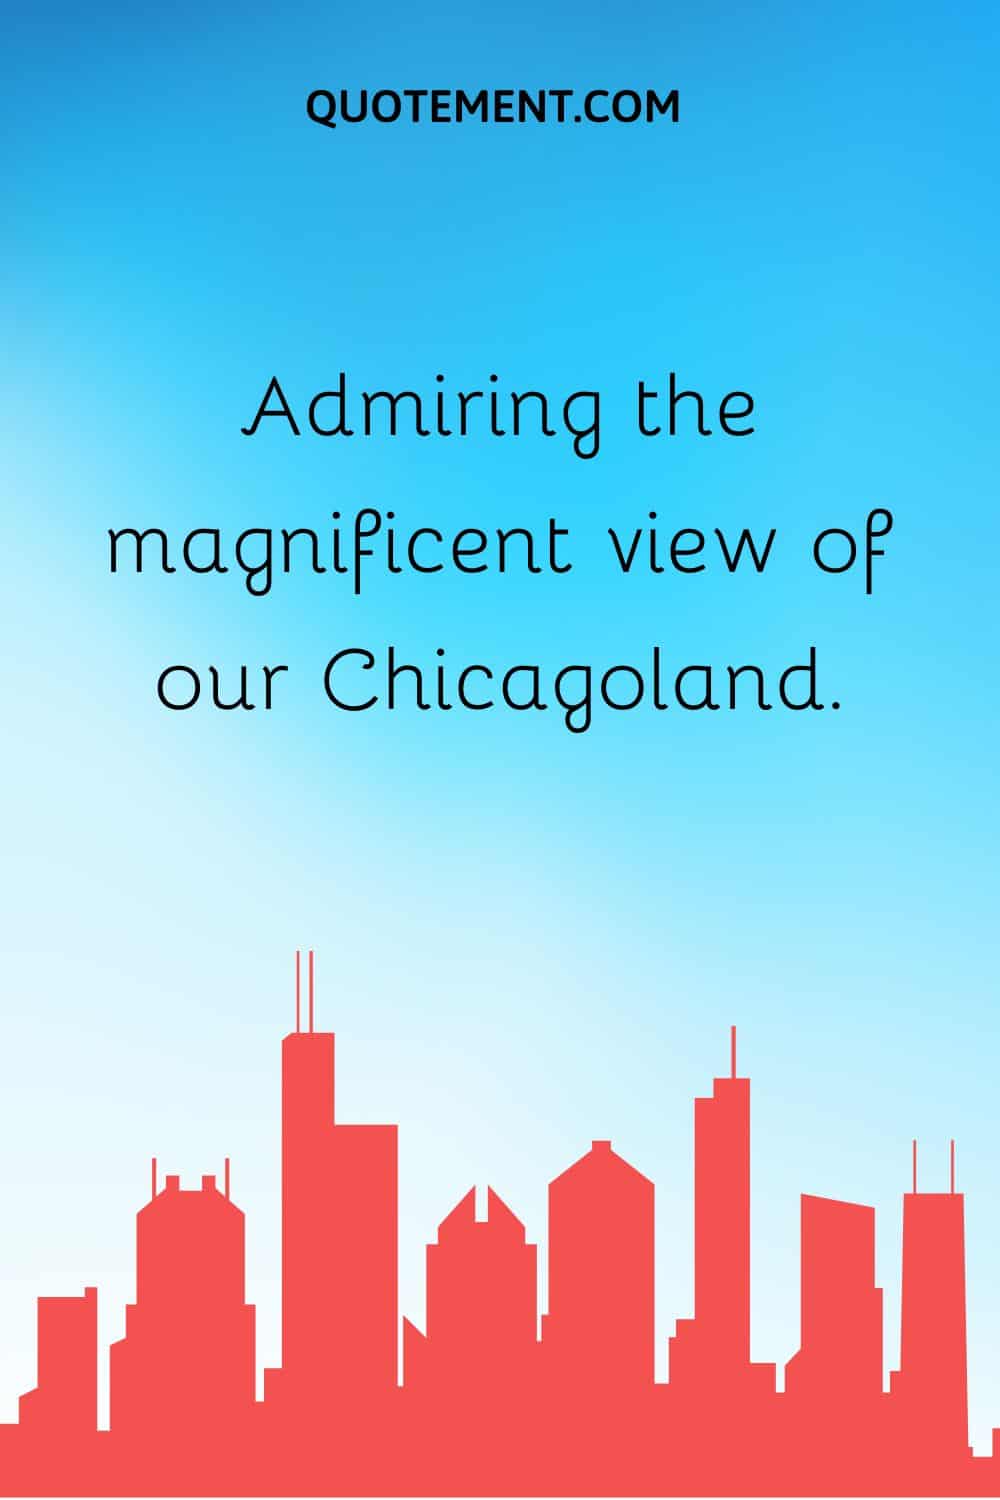 Admiring the magnificent view of our Chicagoland.